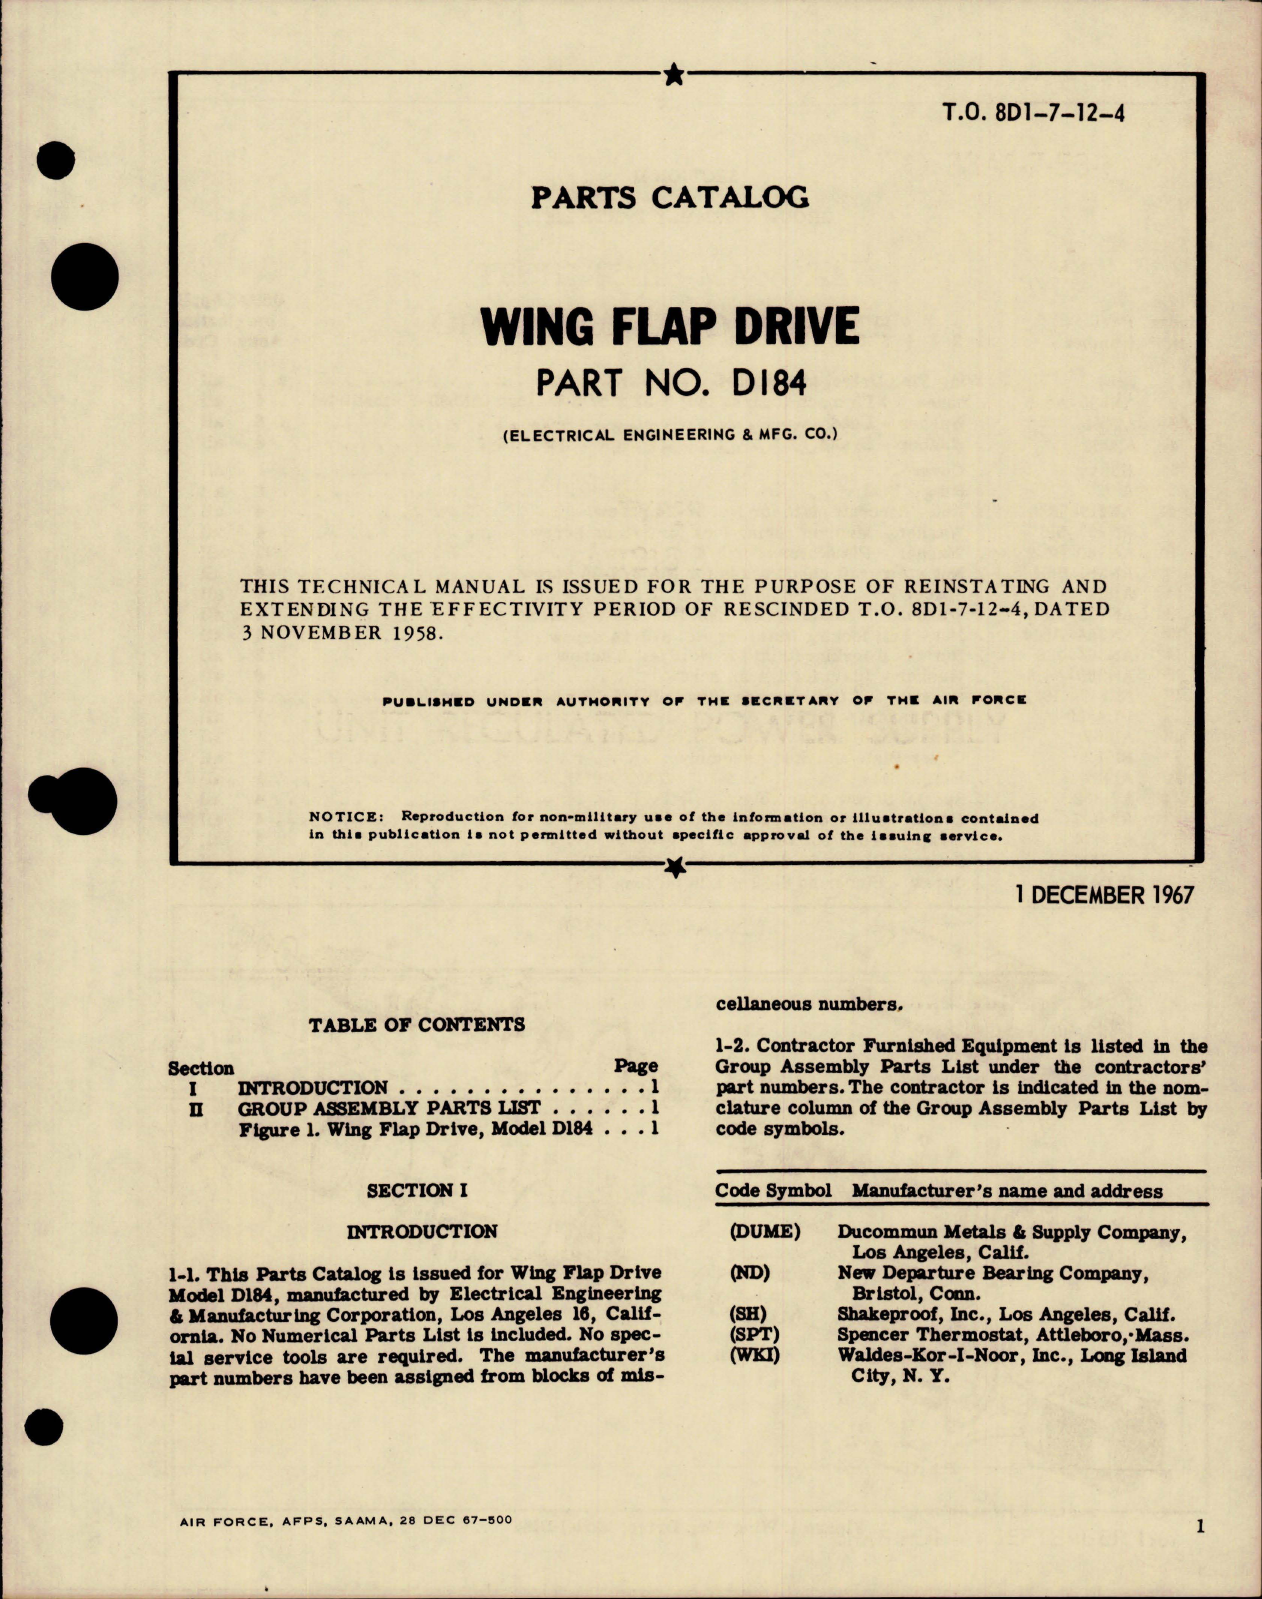 Sample page 1 from AirCorps Library document: Parts Catalog for Wing Flap Drive - Part D184 